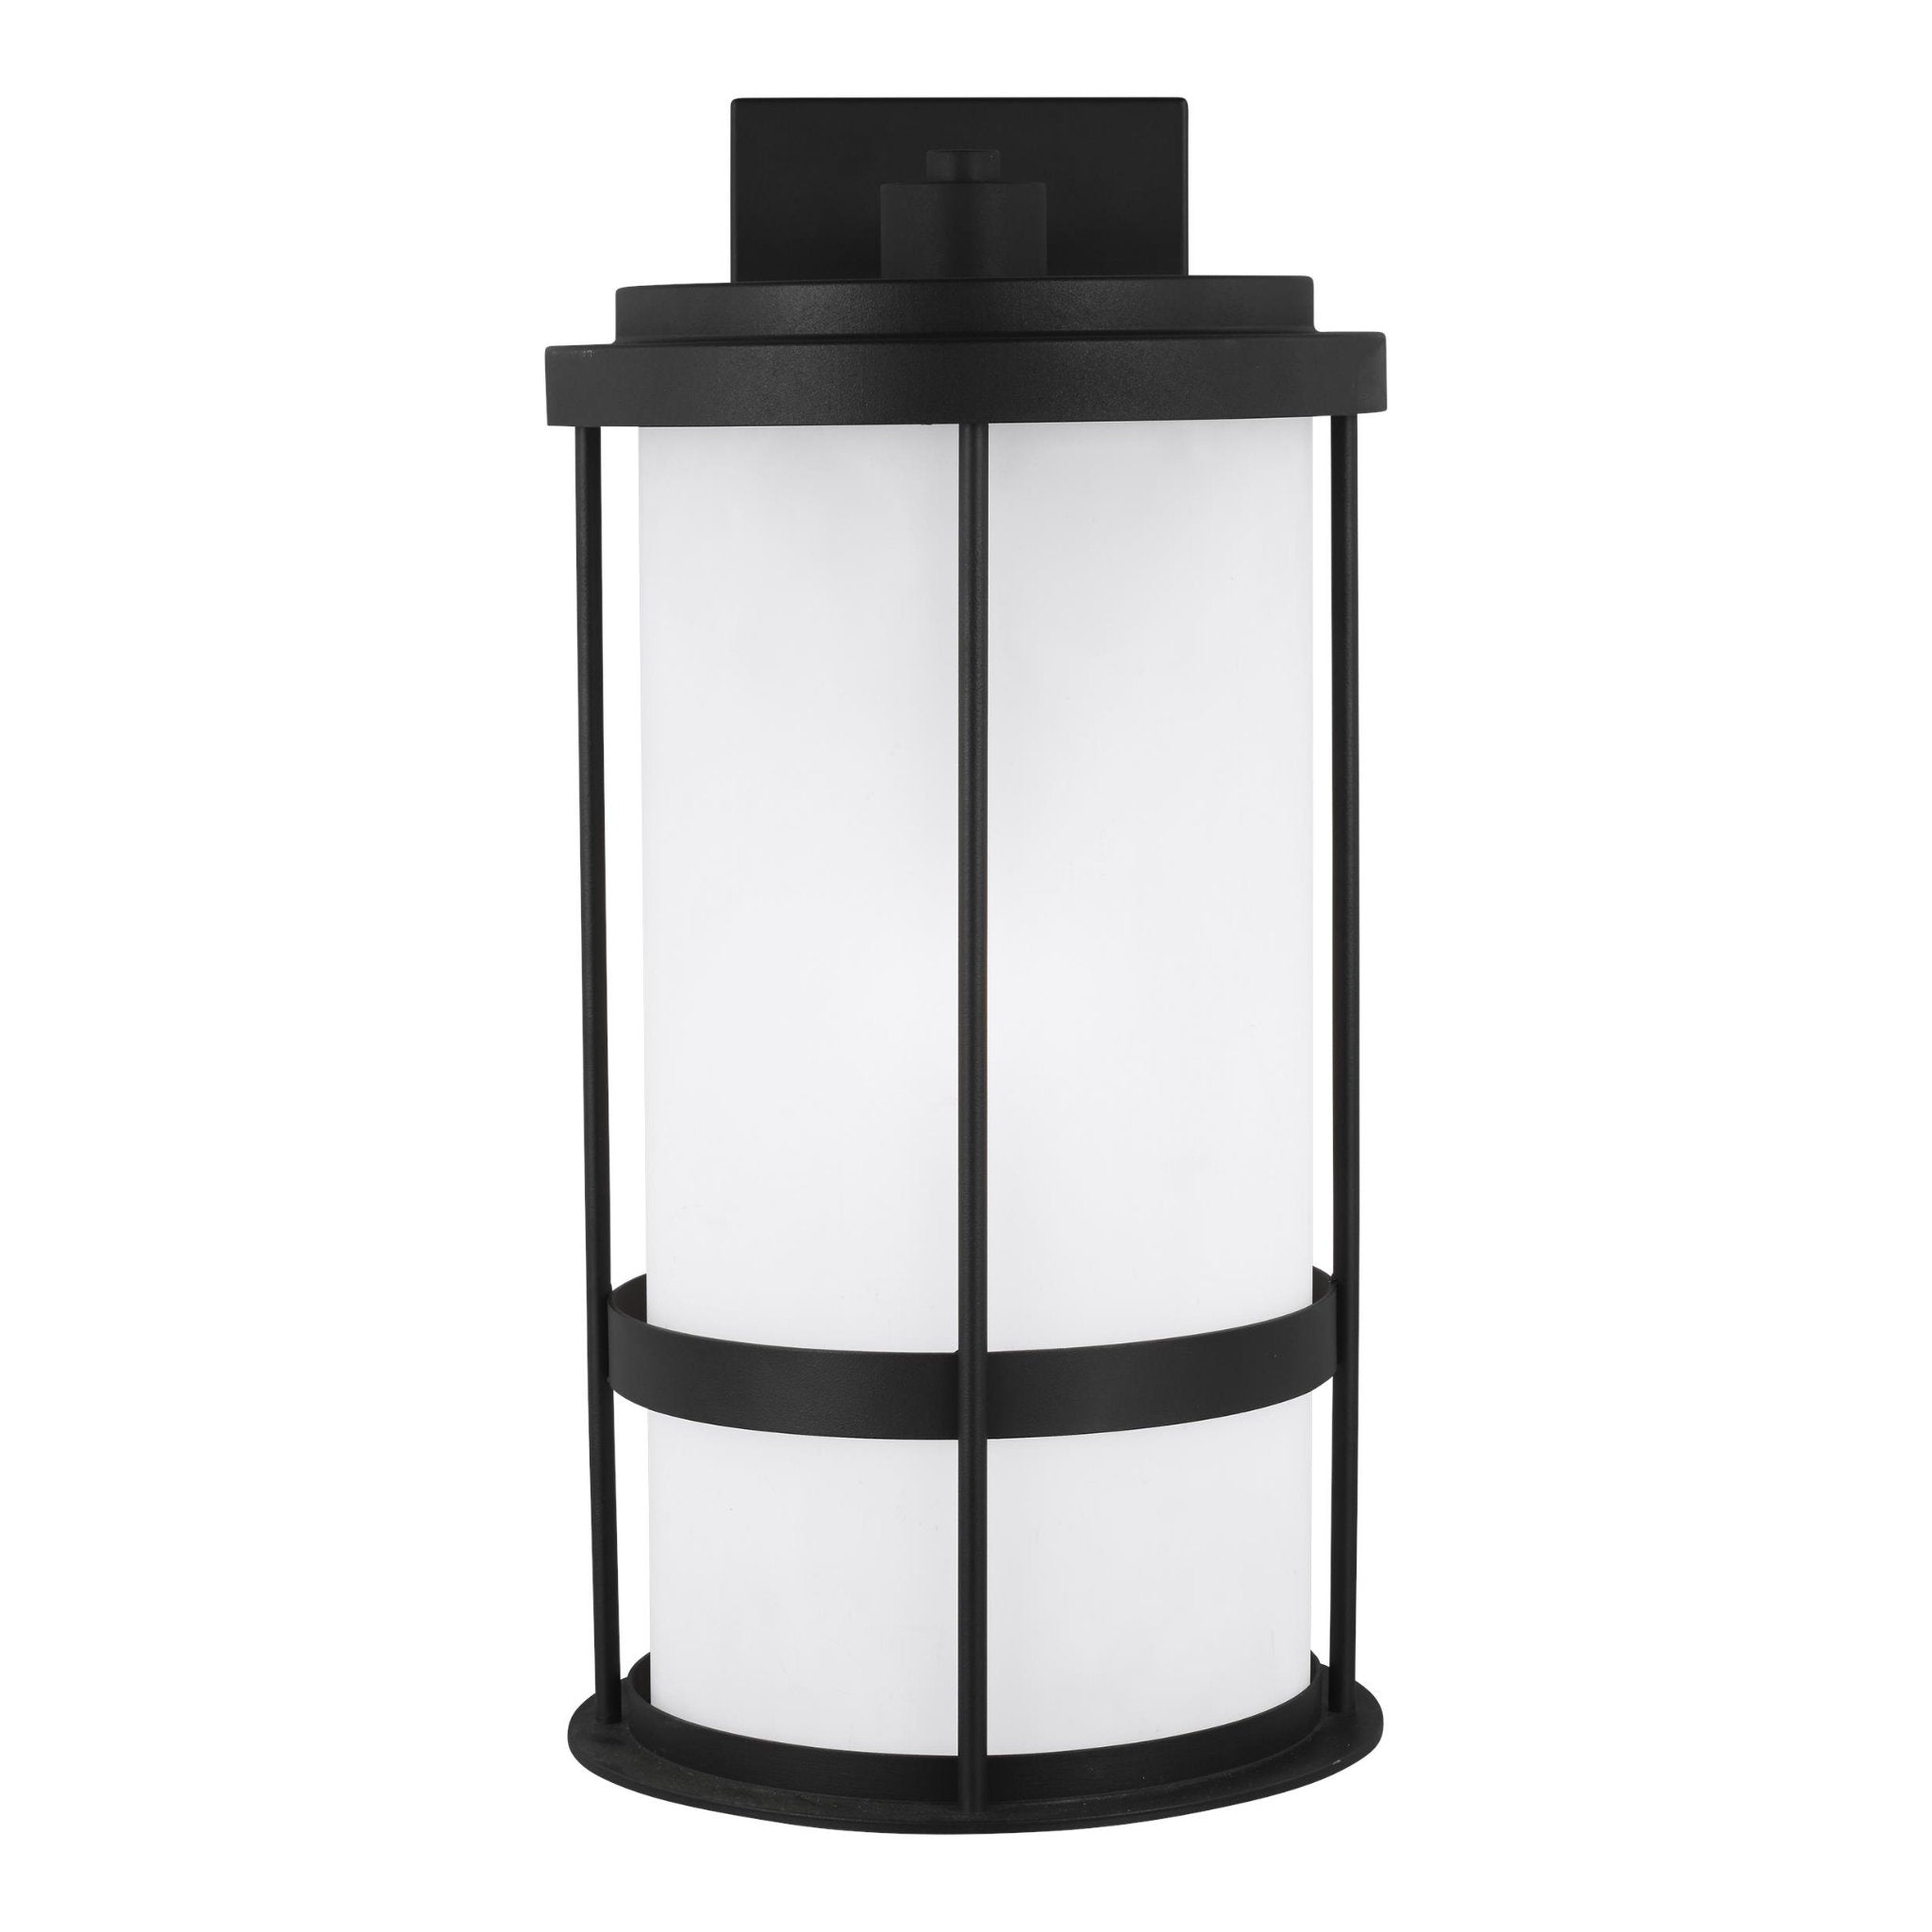 Wilburn Large One Light Outdoor Wall Lantern LED Transitional Fixture Dark Sky 10" Width 20" Height Aluminum Round Satin Etched Shade in Black